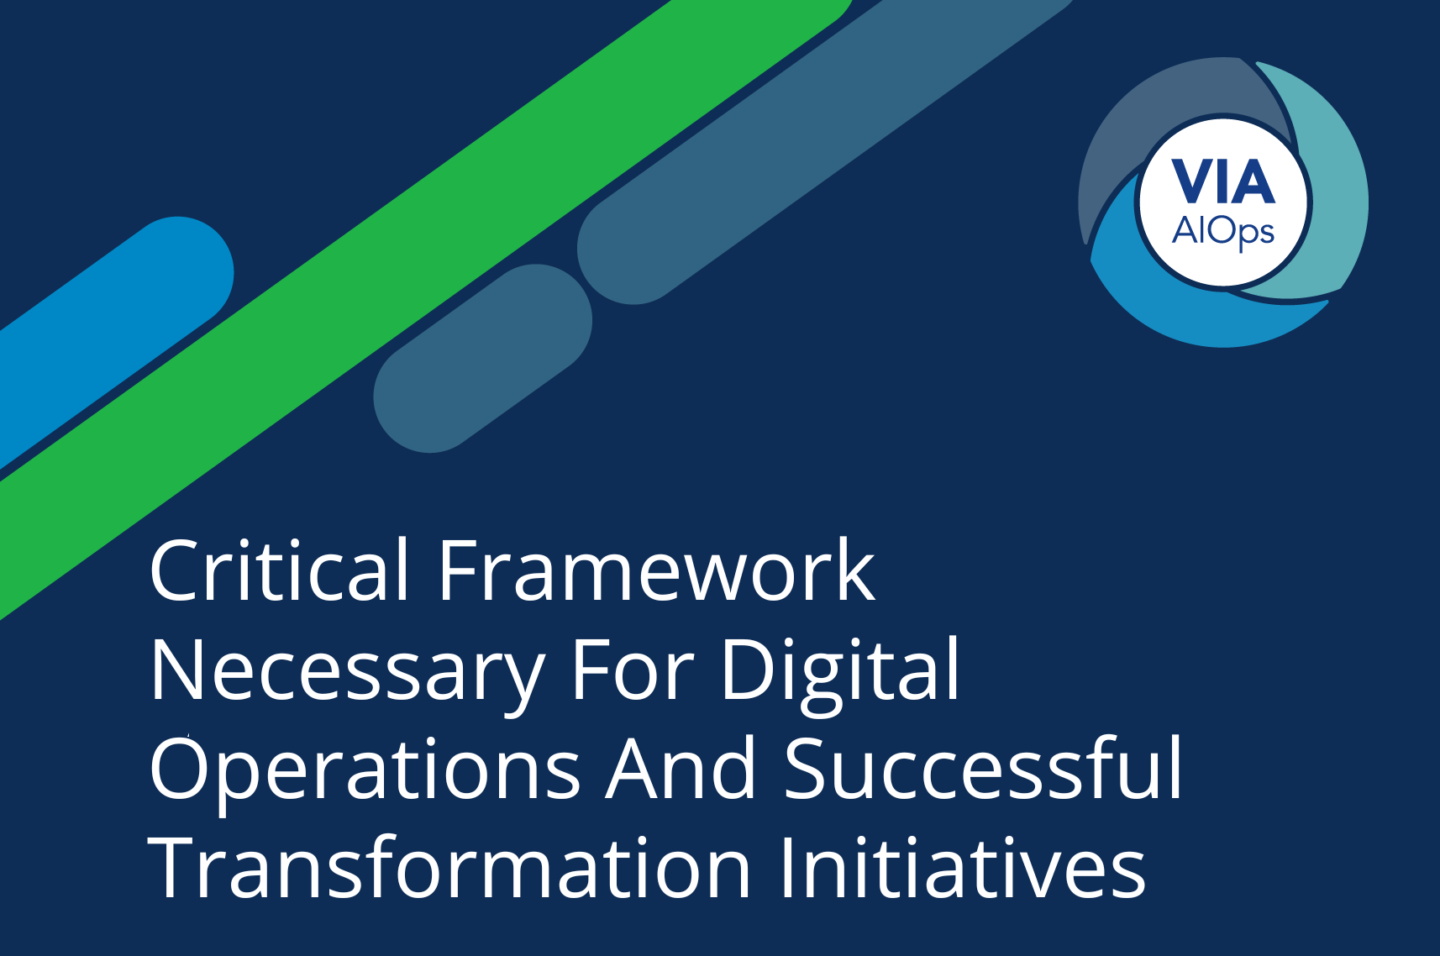 Critical Framework Necessary For Digital Operations And Successful Transformation Initiatives